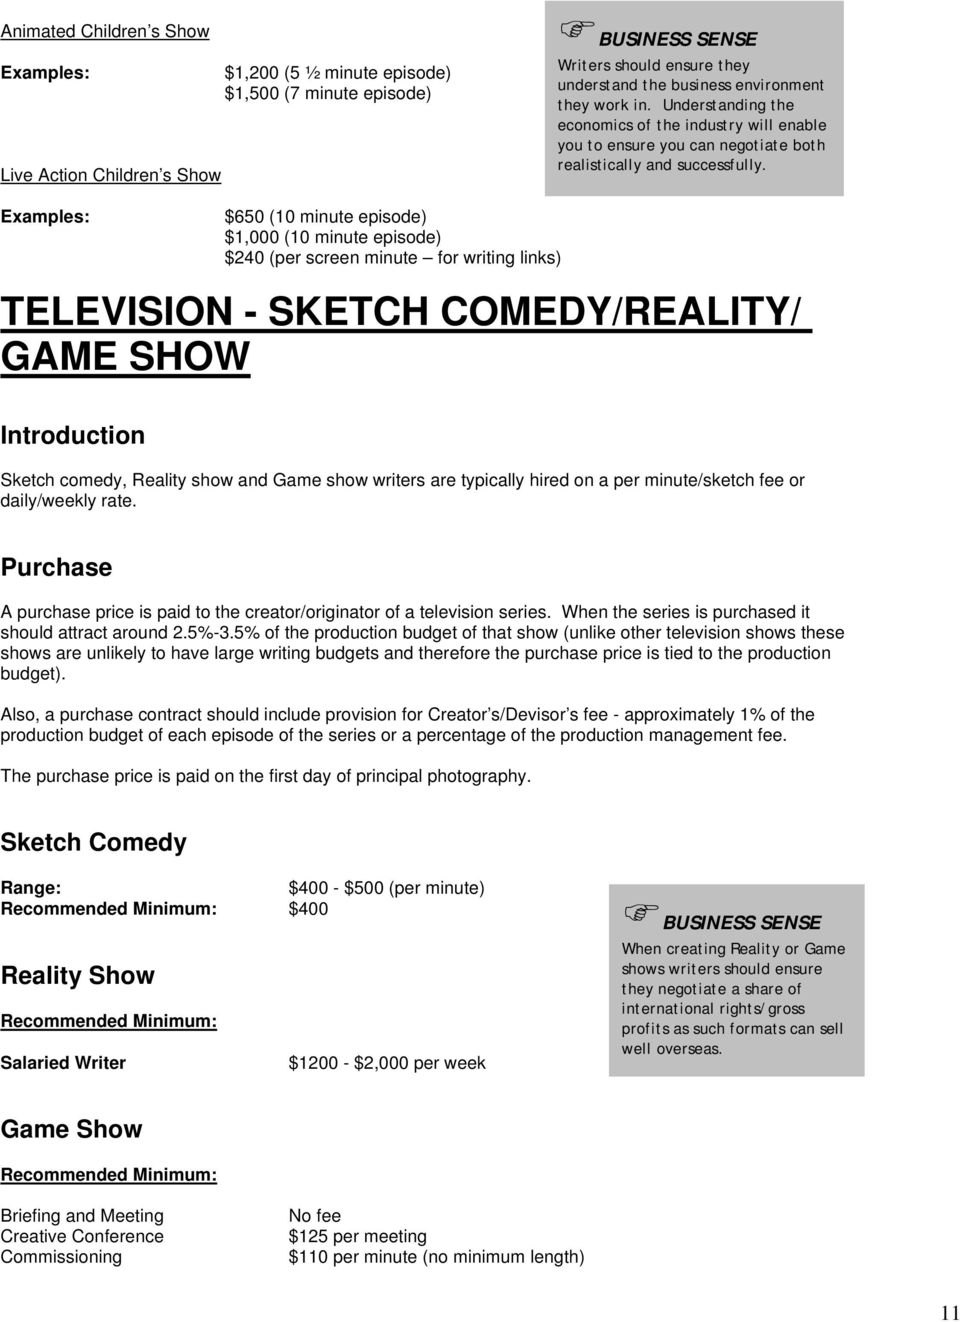 Examples: $650 (10 minute episode) $1,000 (10 minute episode) $240 (per screen minute for writing links) TELEVISION - SKETCH COMEDY/REALITY/ GAME SHOW Introduction Sketch comedy, Reality show and